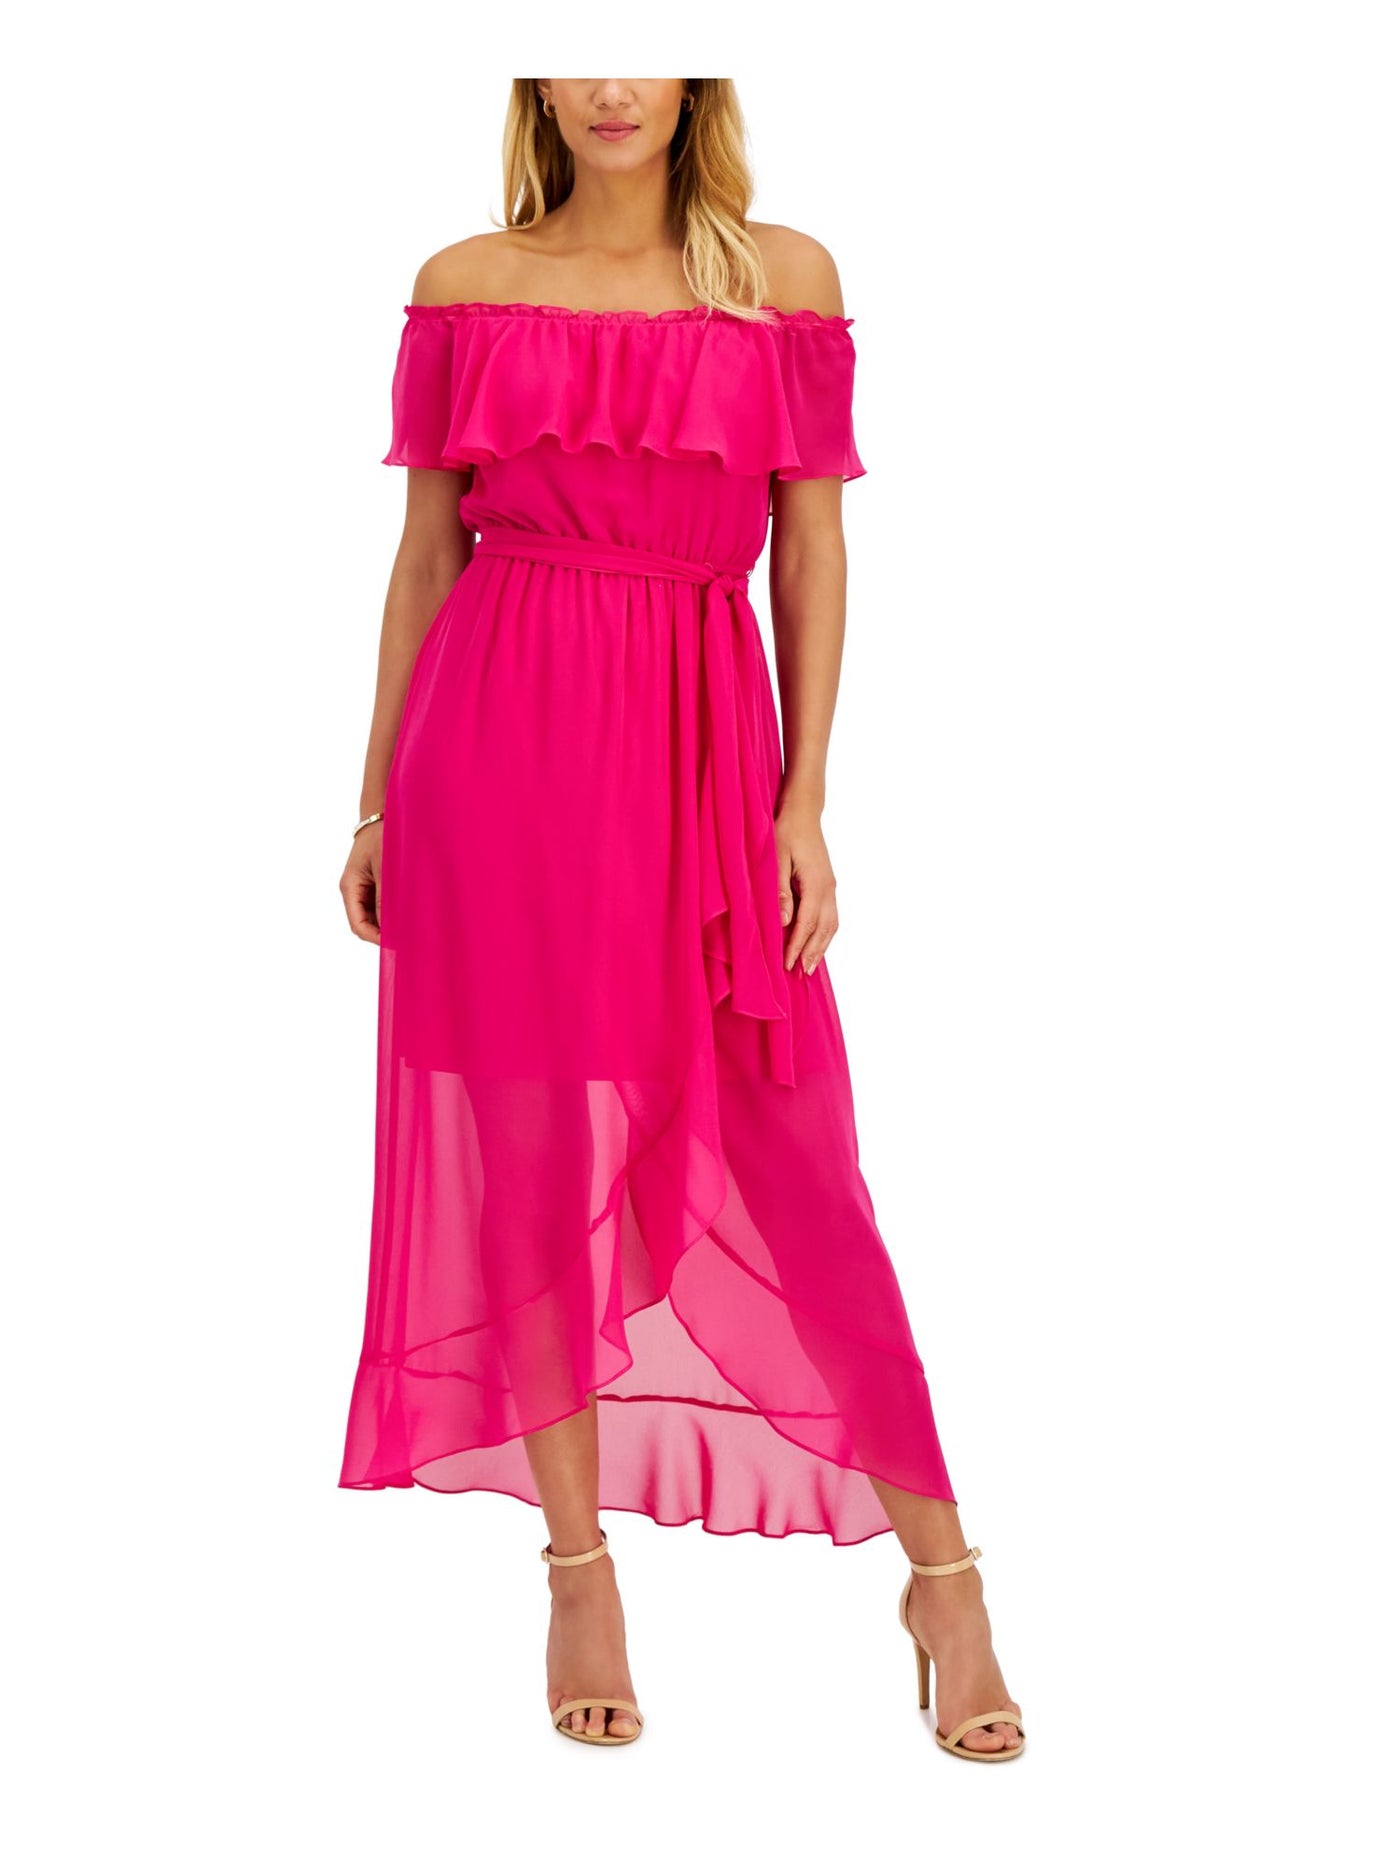 SLNY Womens Pink Ruffled Sheer Lined Tie Waist Short Sleeve Off Shoulder Maxi Party Fit + Flare Dress 16